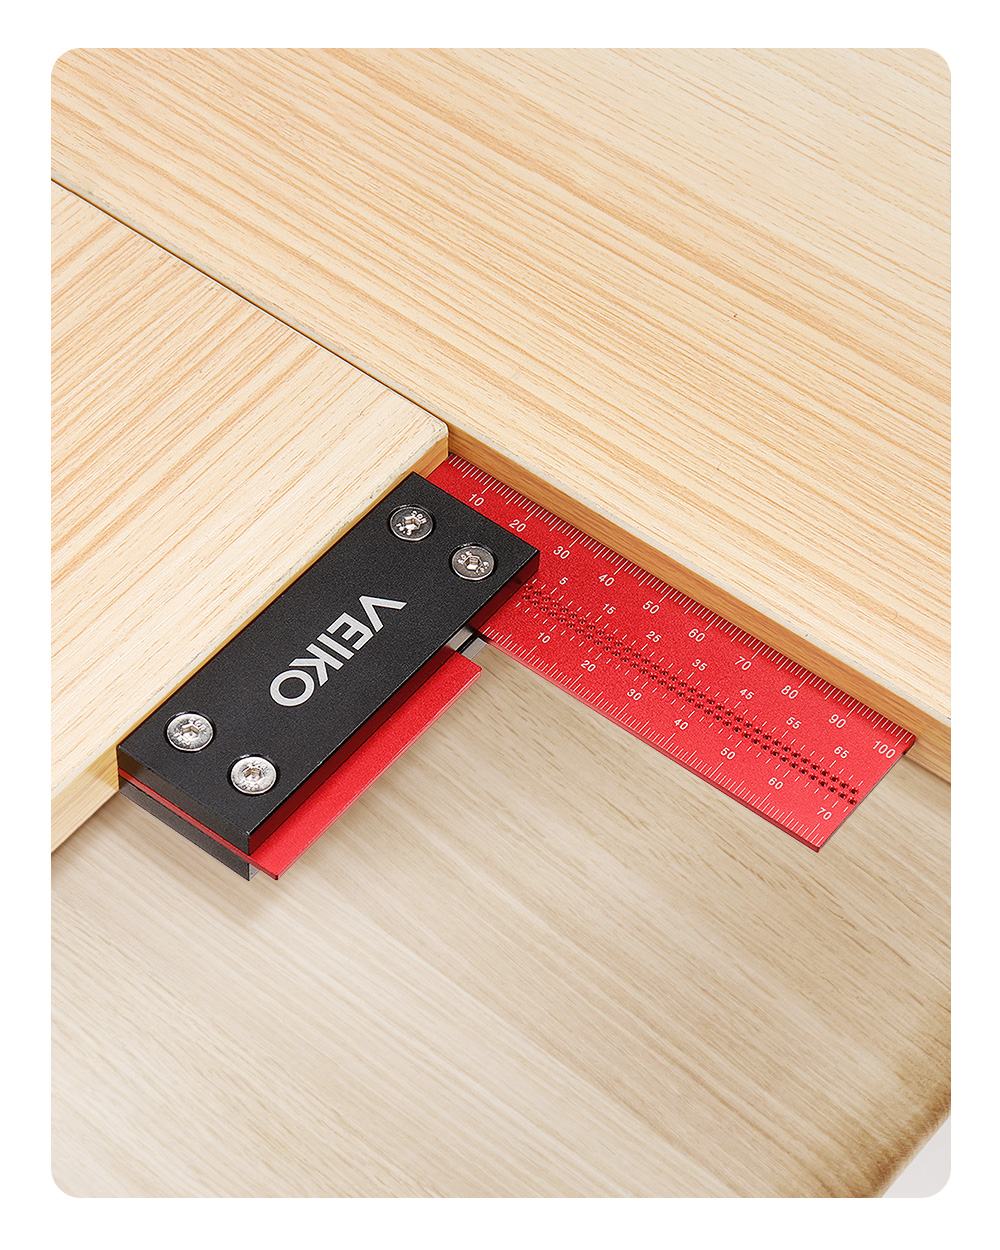 VEIKO-100mm4Inch-Aluminum-Alloy-Woodworking-Ruler-Precision-Square-Guaranteed-T-Speed-Measurements-R-1928717-9